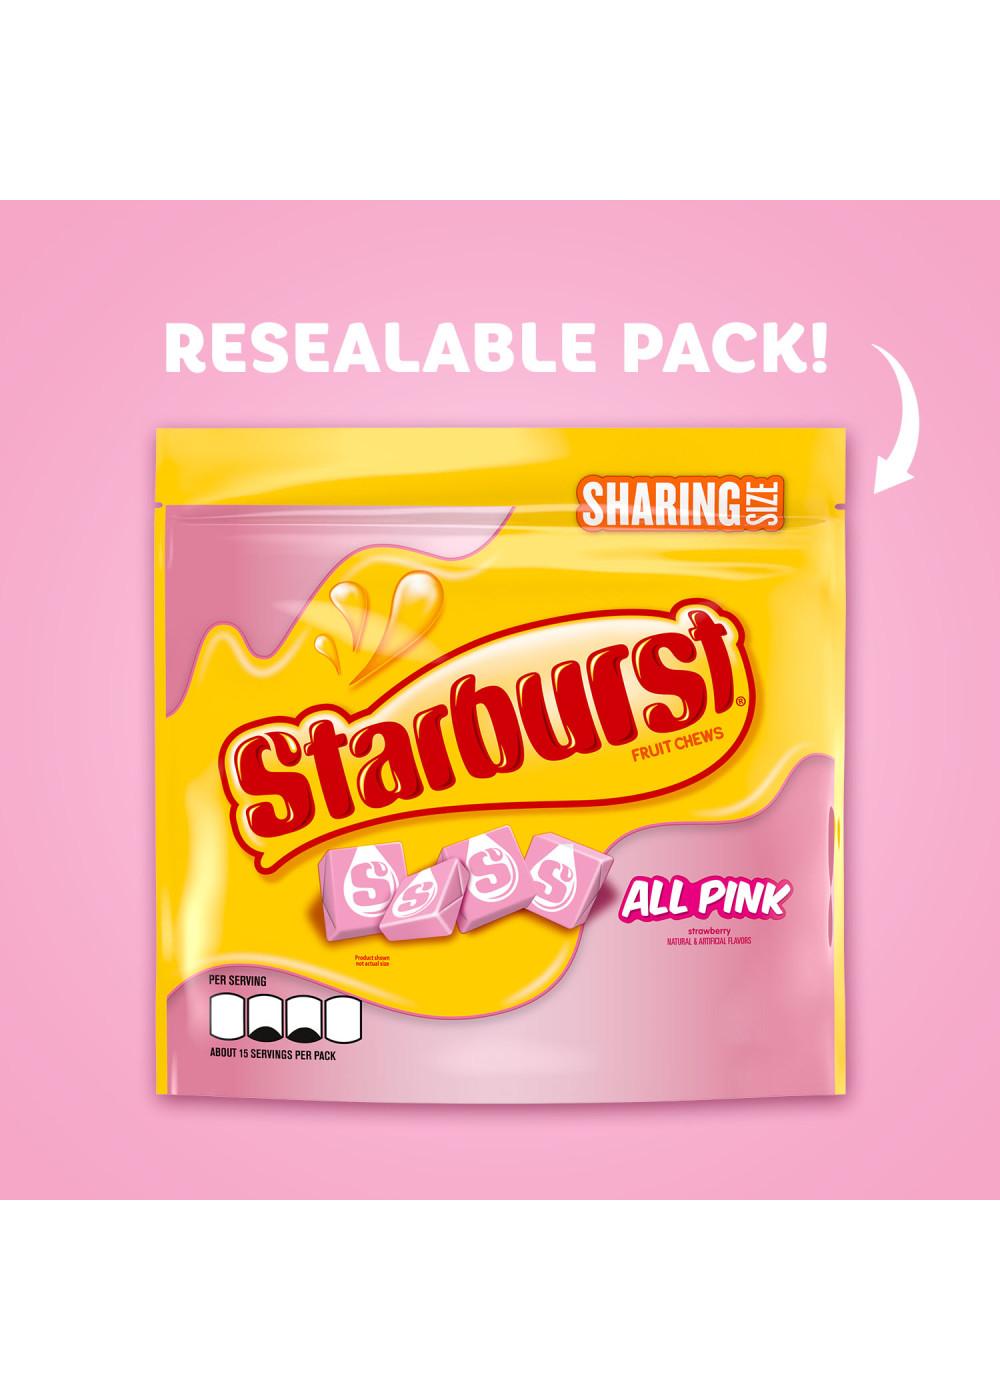 Starburst All Pink Chewy Candy - Sharing Size; image 6 of 7